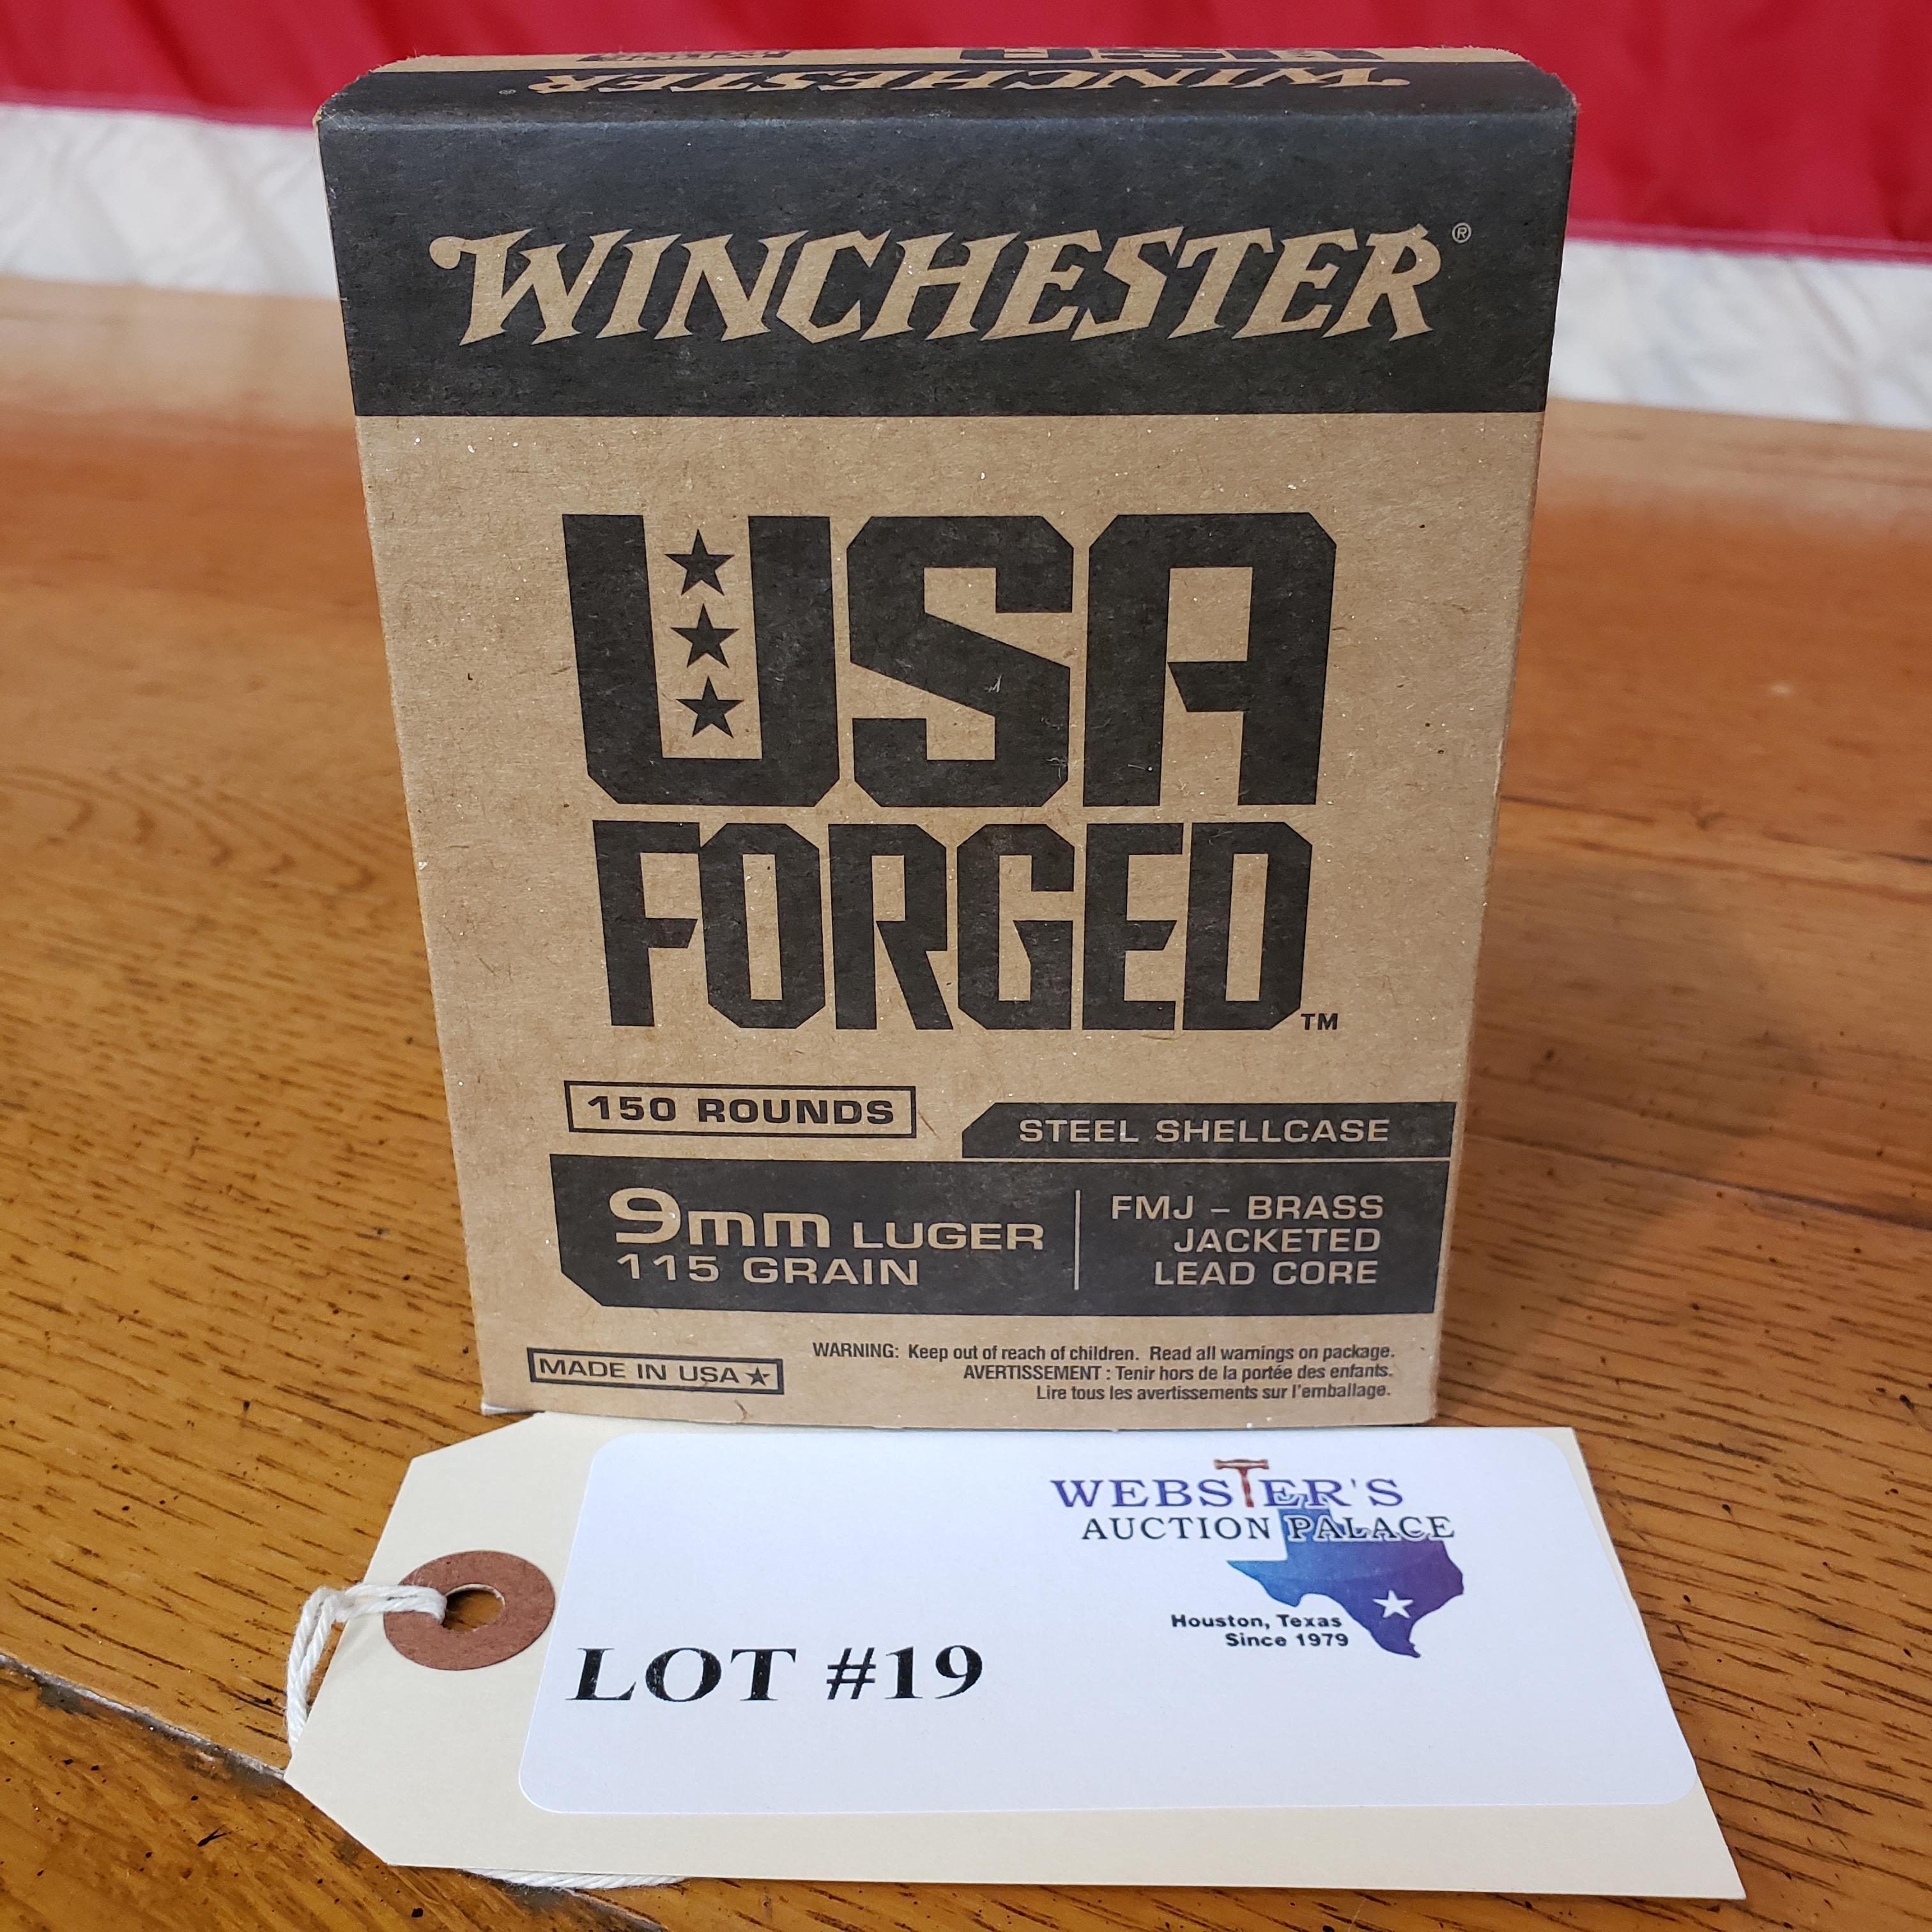 (1) BOX WINCHESTER USA FORGED 9MM LUGER